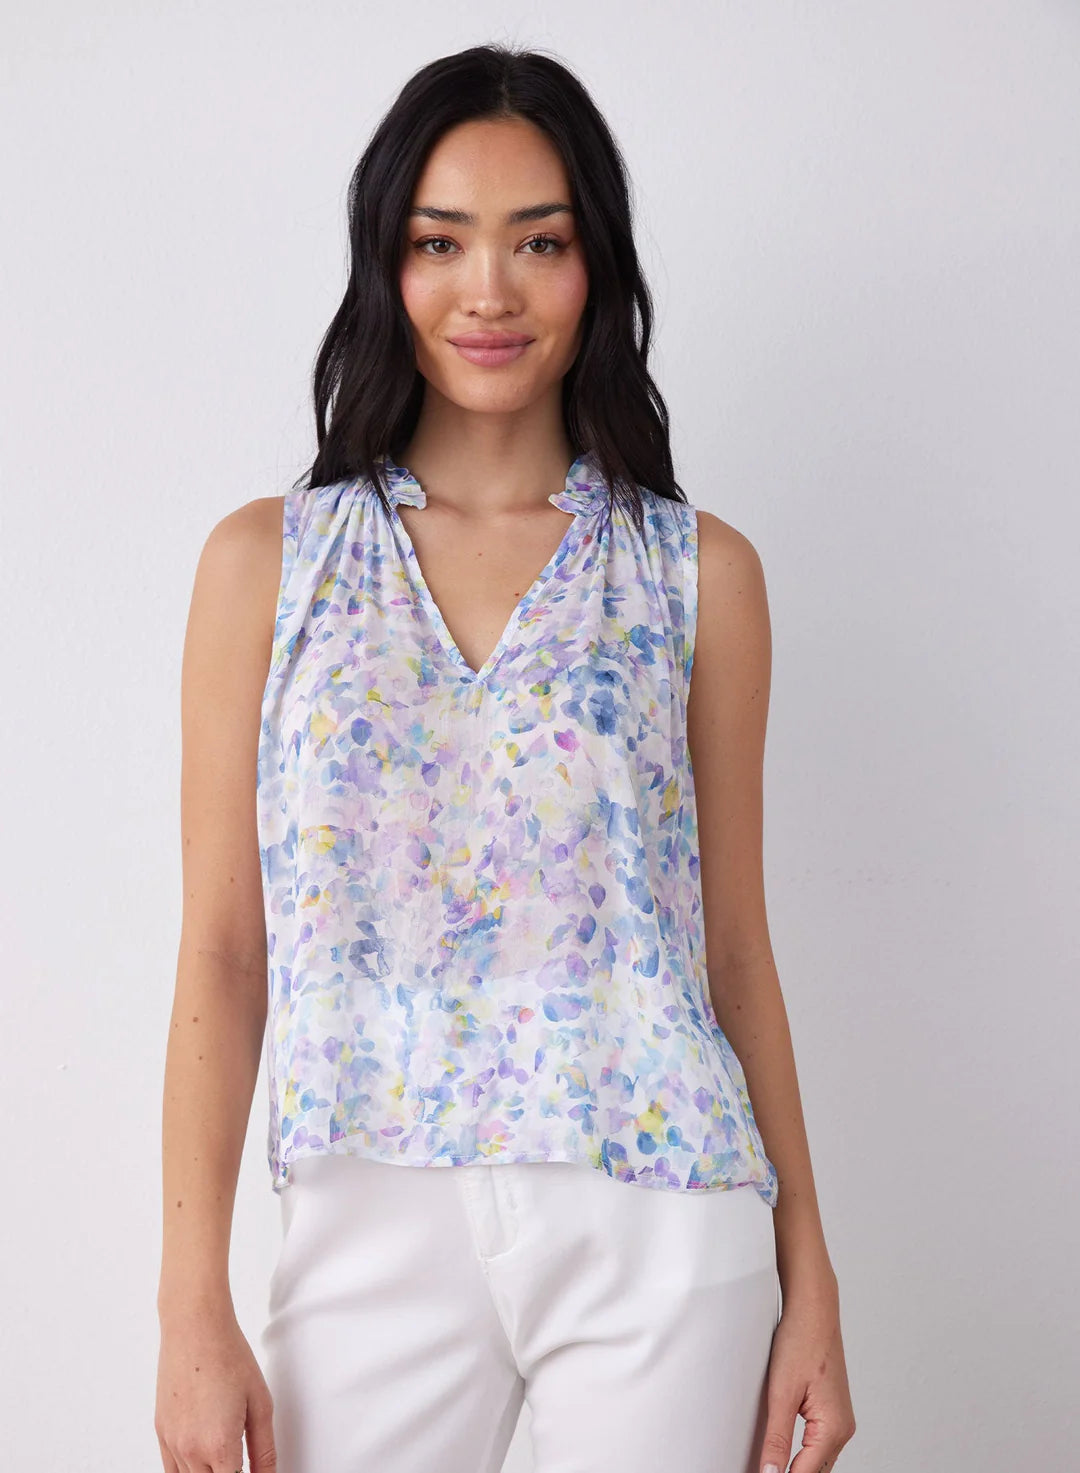 Ruffle Neck Tank - Orchid Floral Print